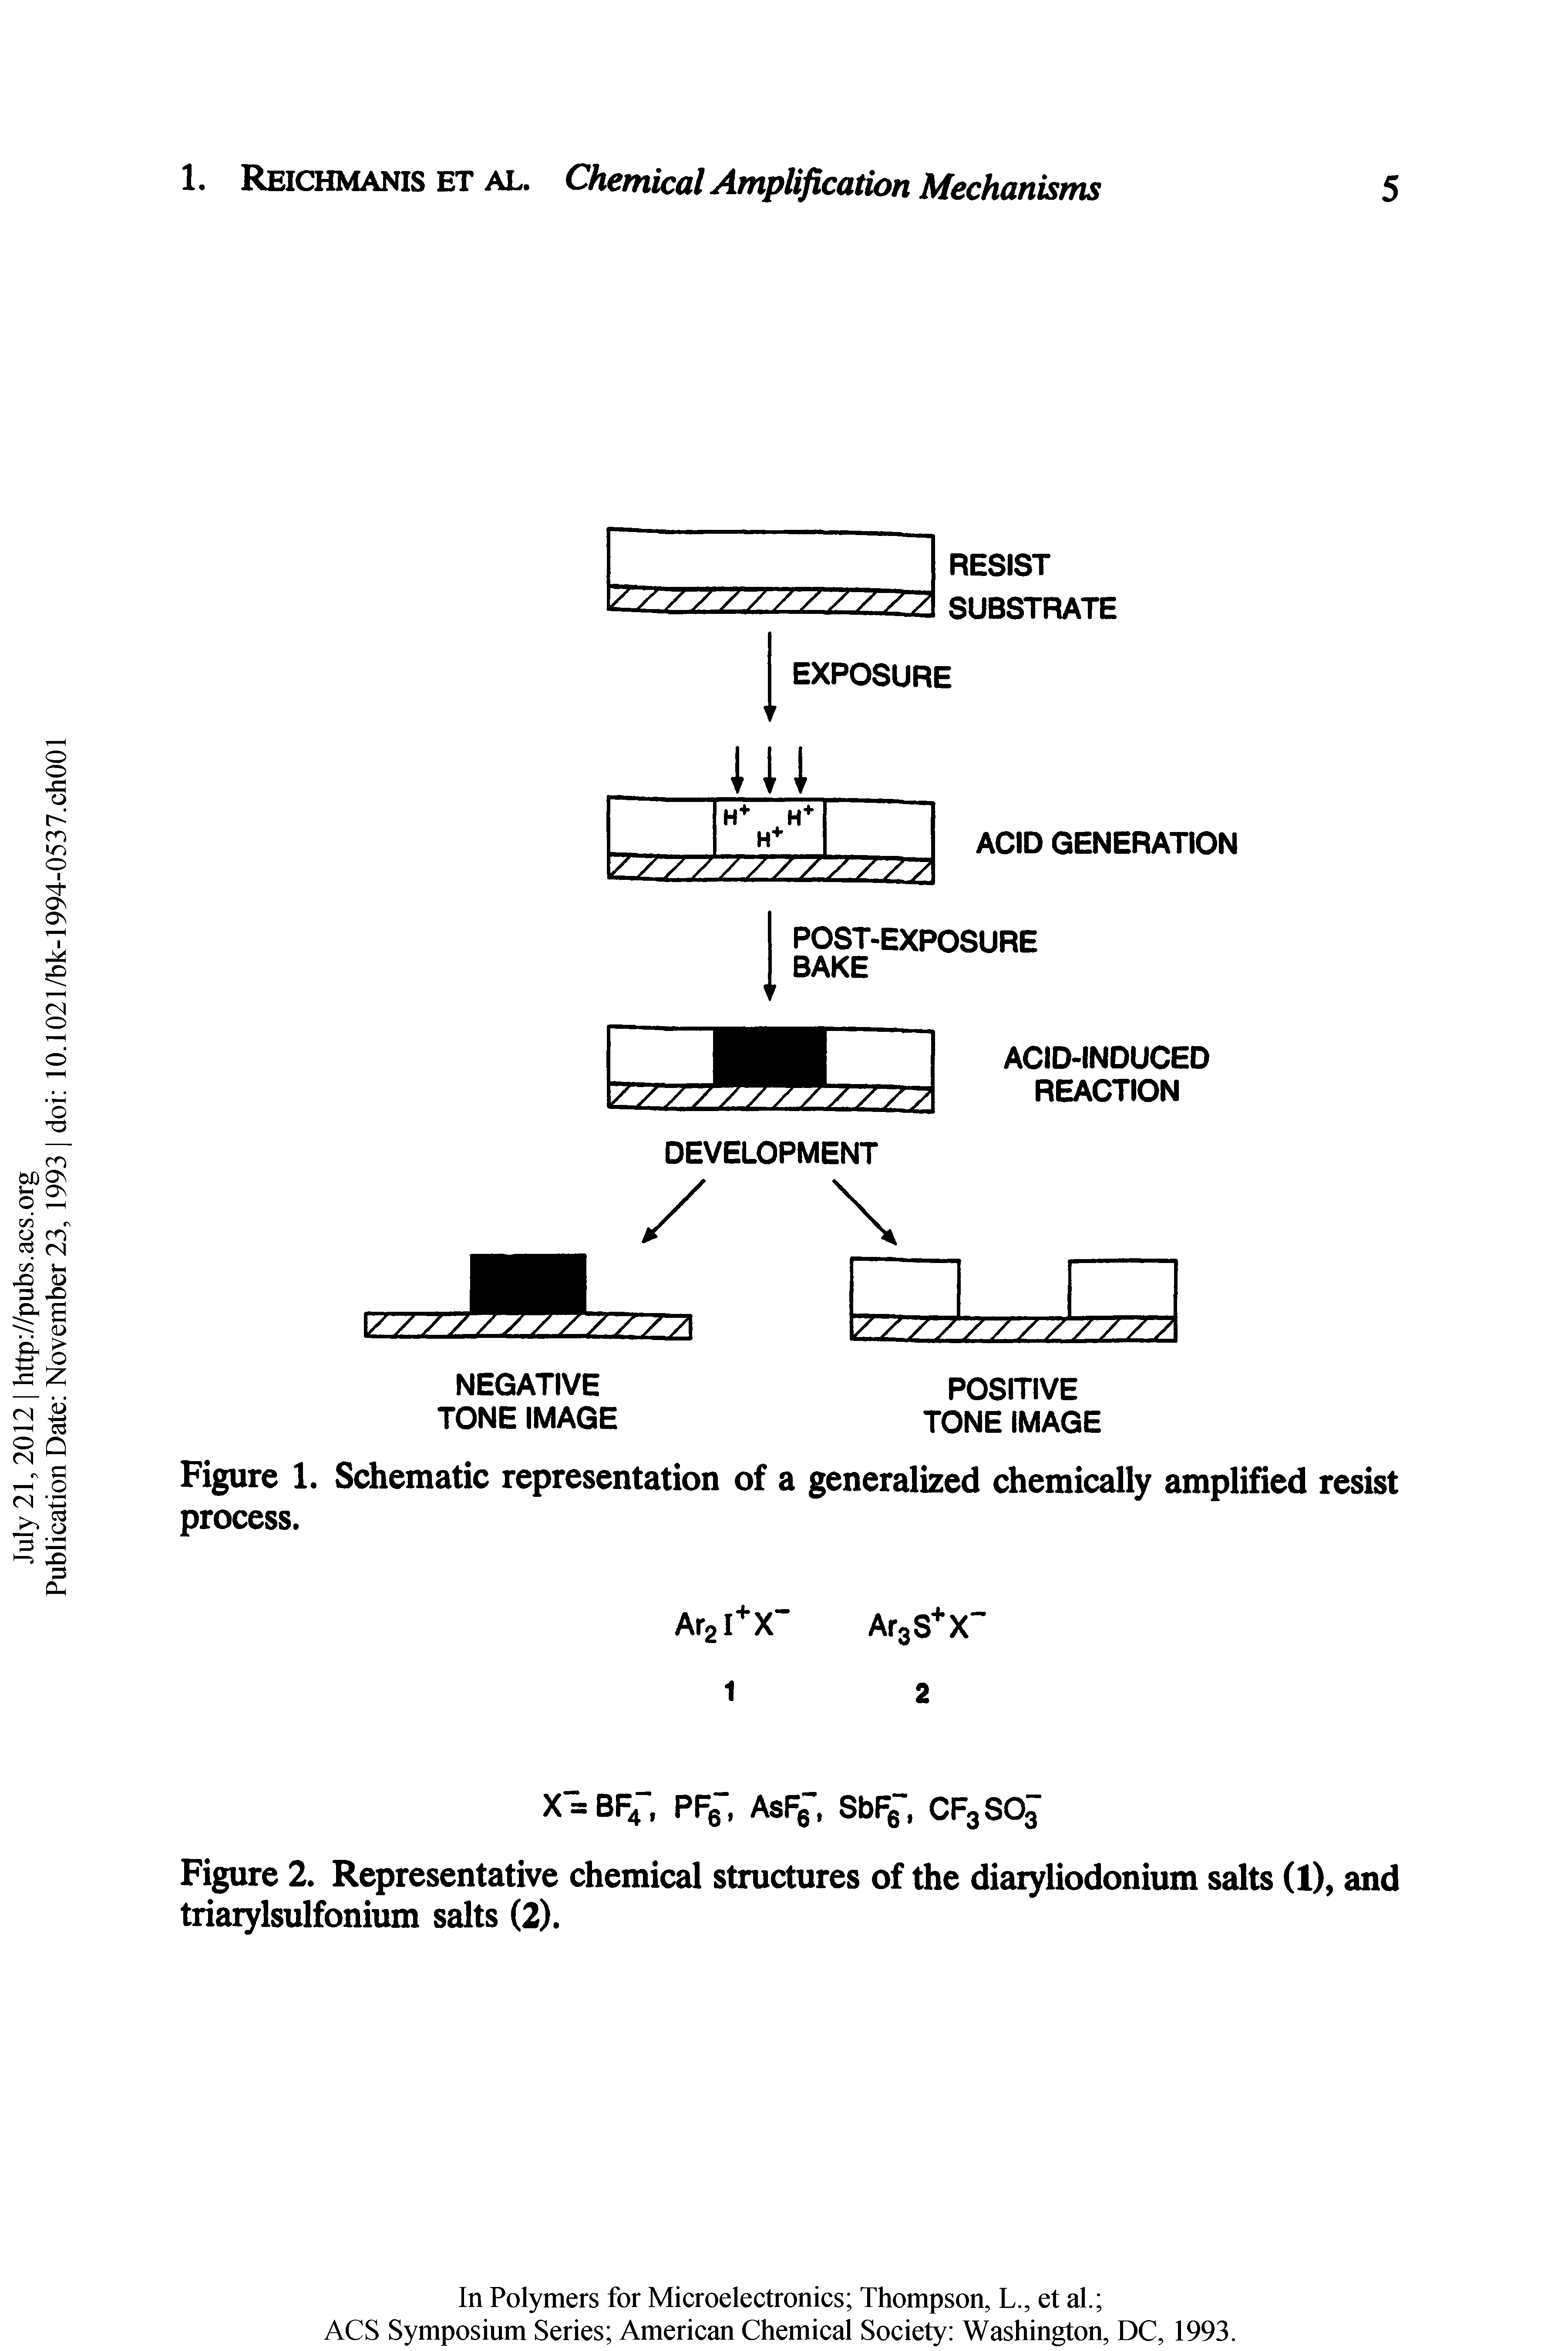 Figure 1. Schematic representation of a generalized chemically amplified resist process.